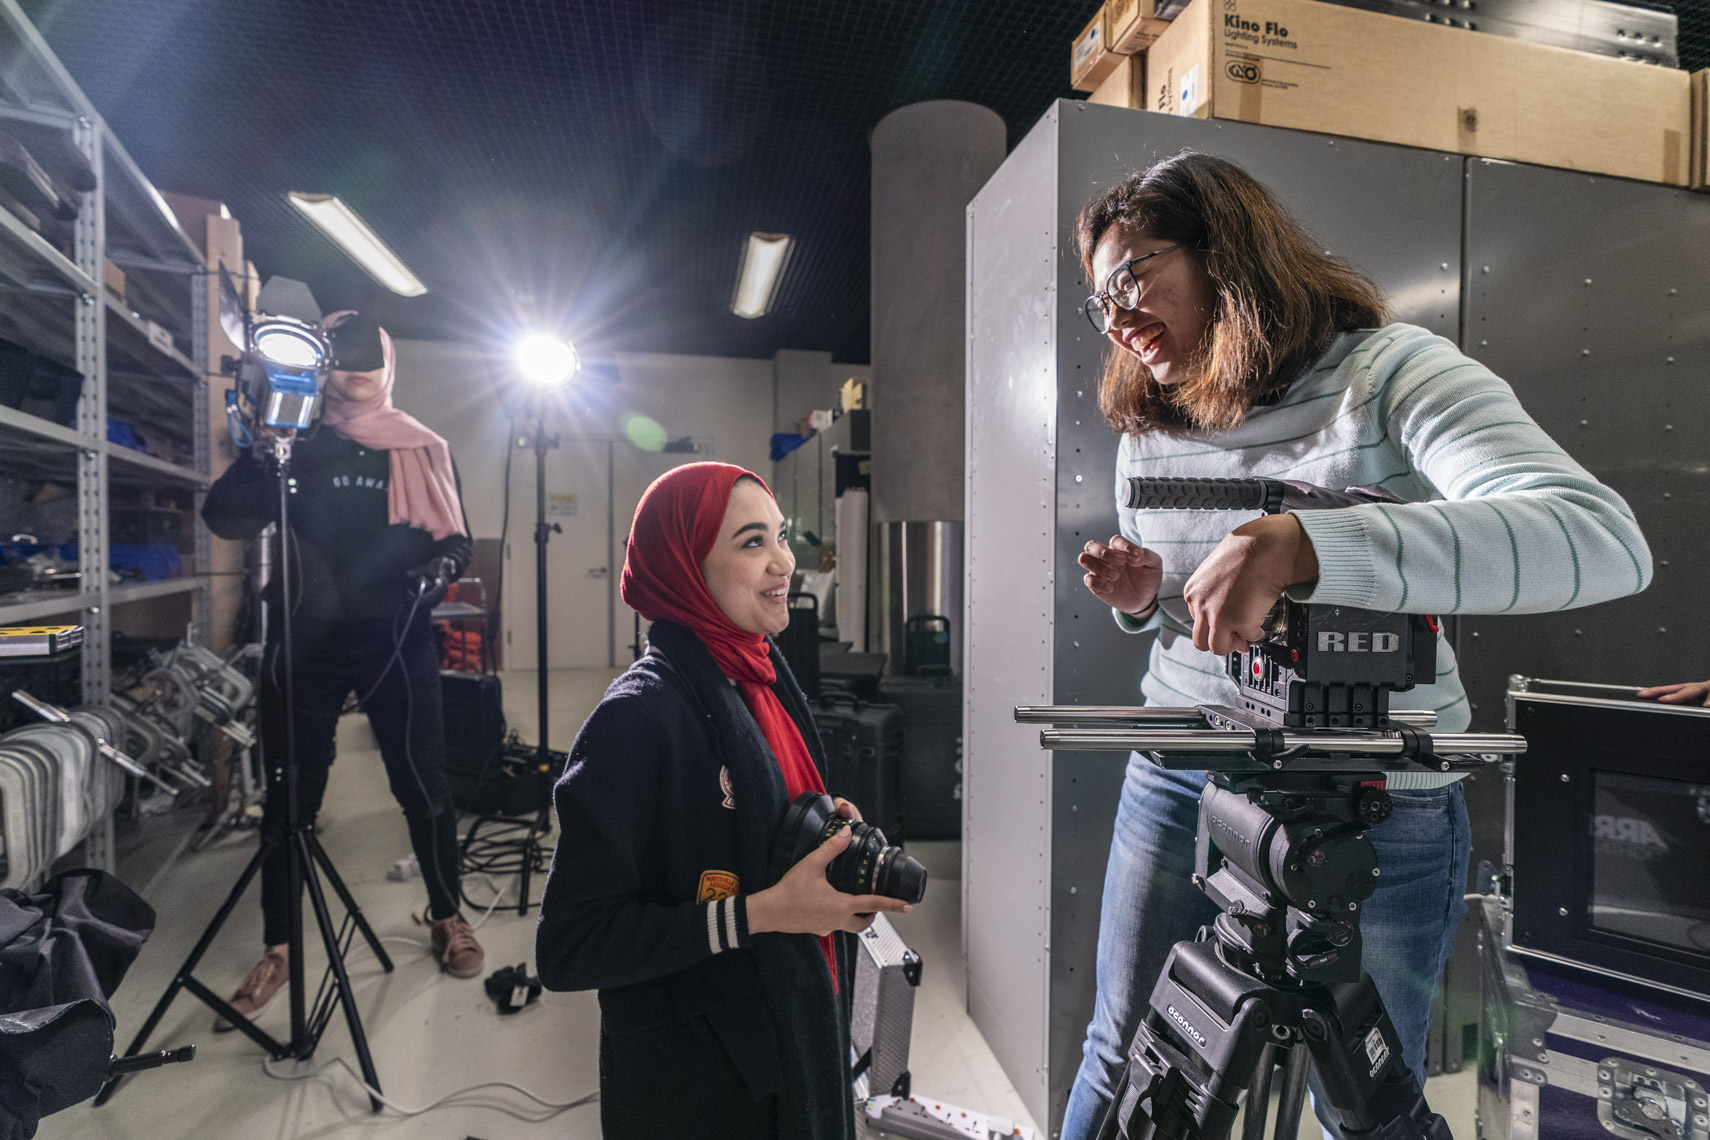 Students gather video equipment during a film class at a university in Doha, Qatar in a photo by Ryan Donnell